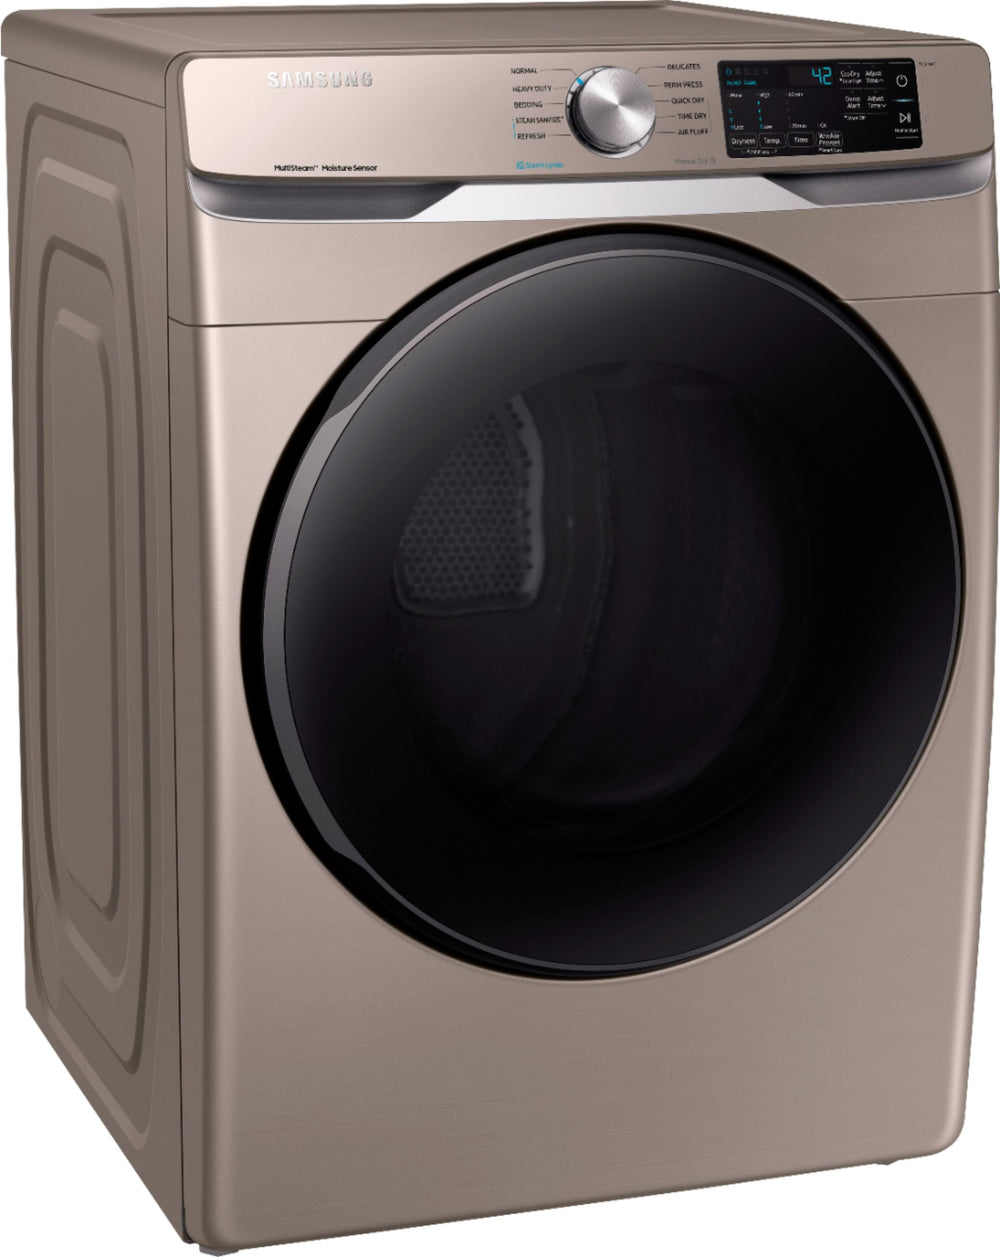 Samsung - 7.5 Cu. Ft. Stackable Gas Dryer with Steam and Sensor Dry - Champagne_1